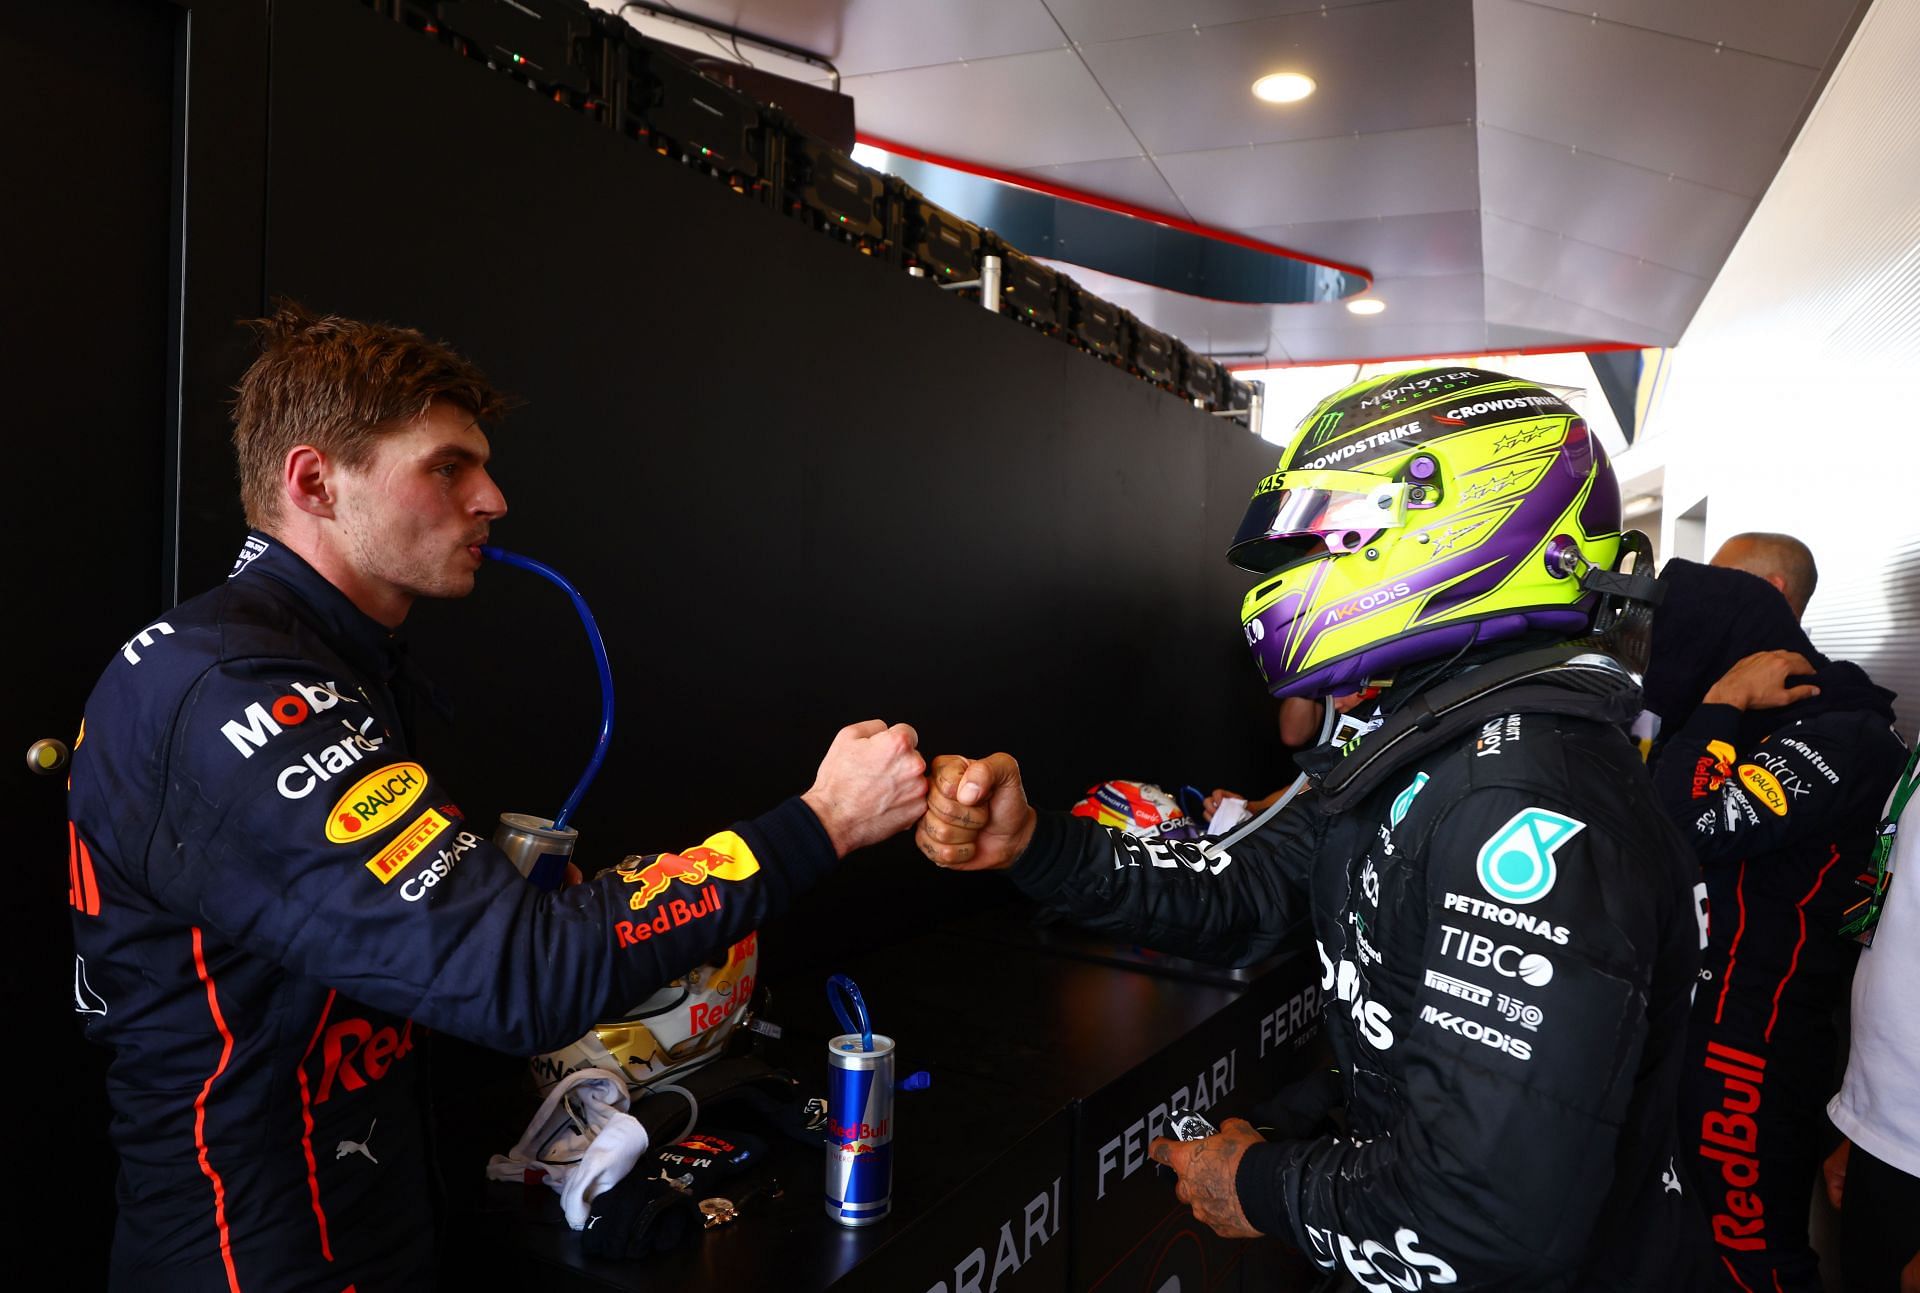 F1 Grand Prix of Spain - Max Verstappen and Lewis Hamilton share a moment.